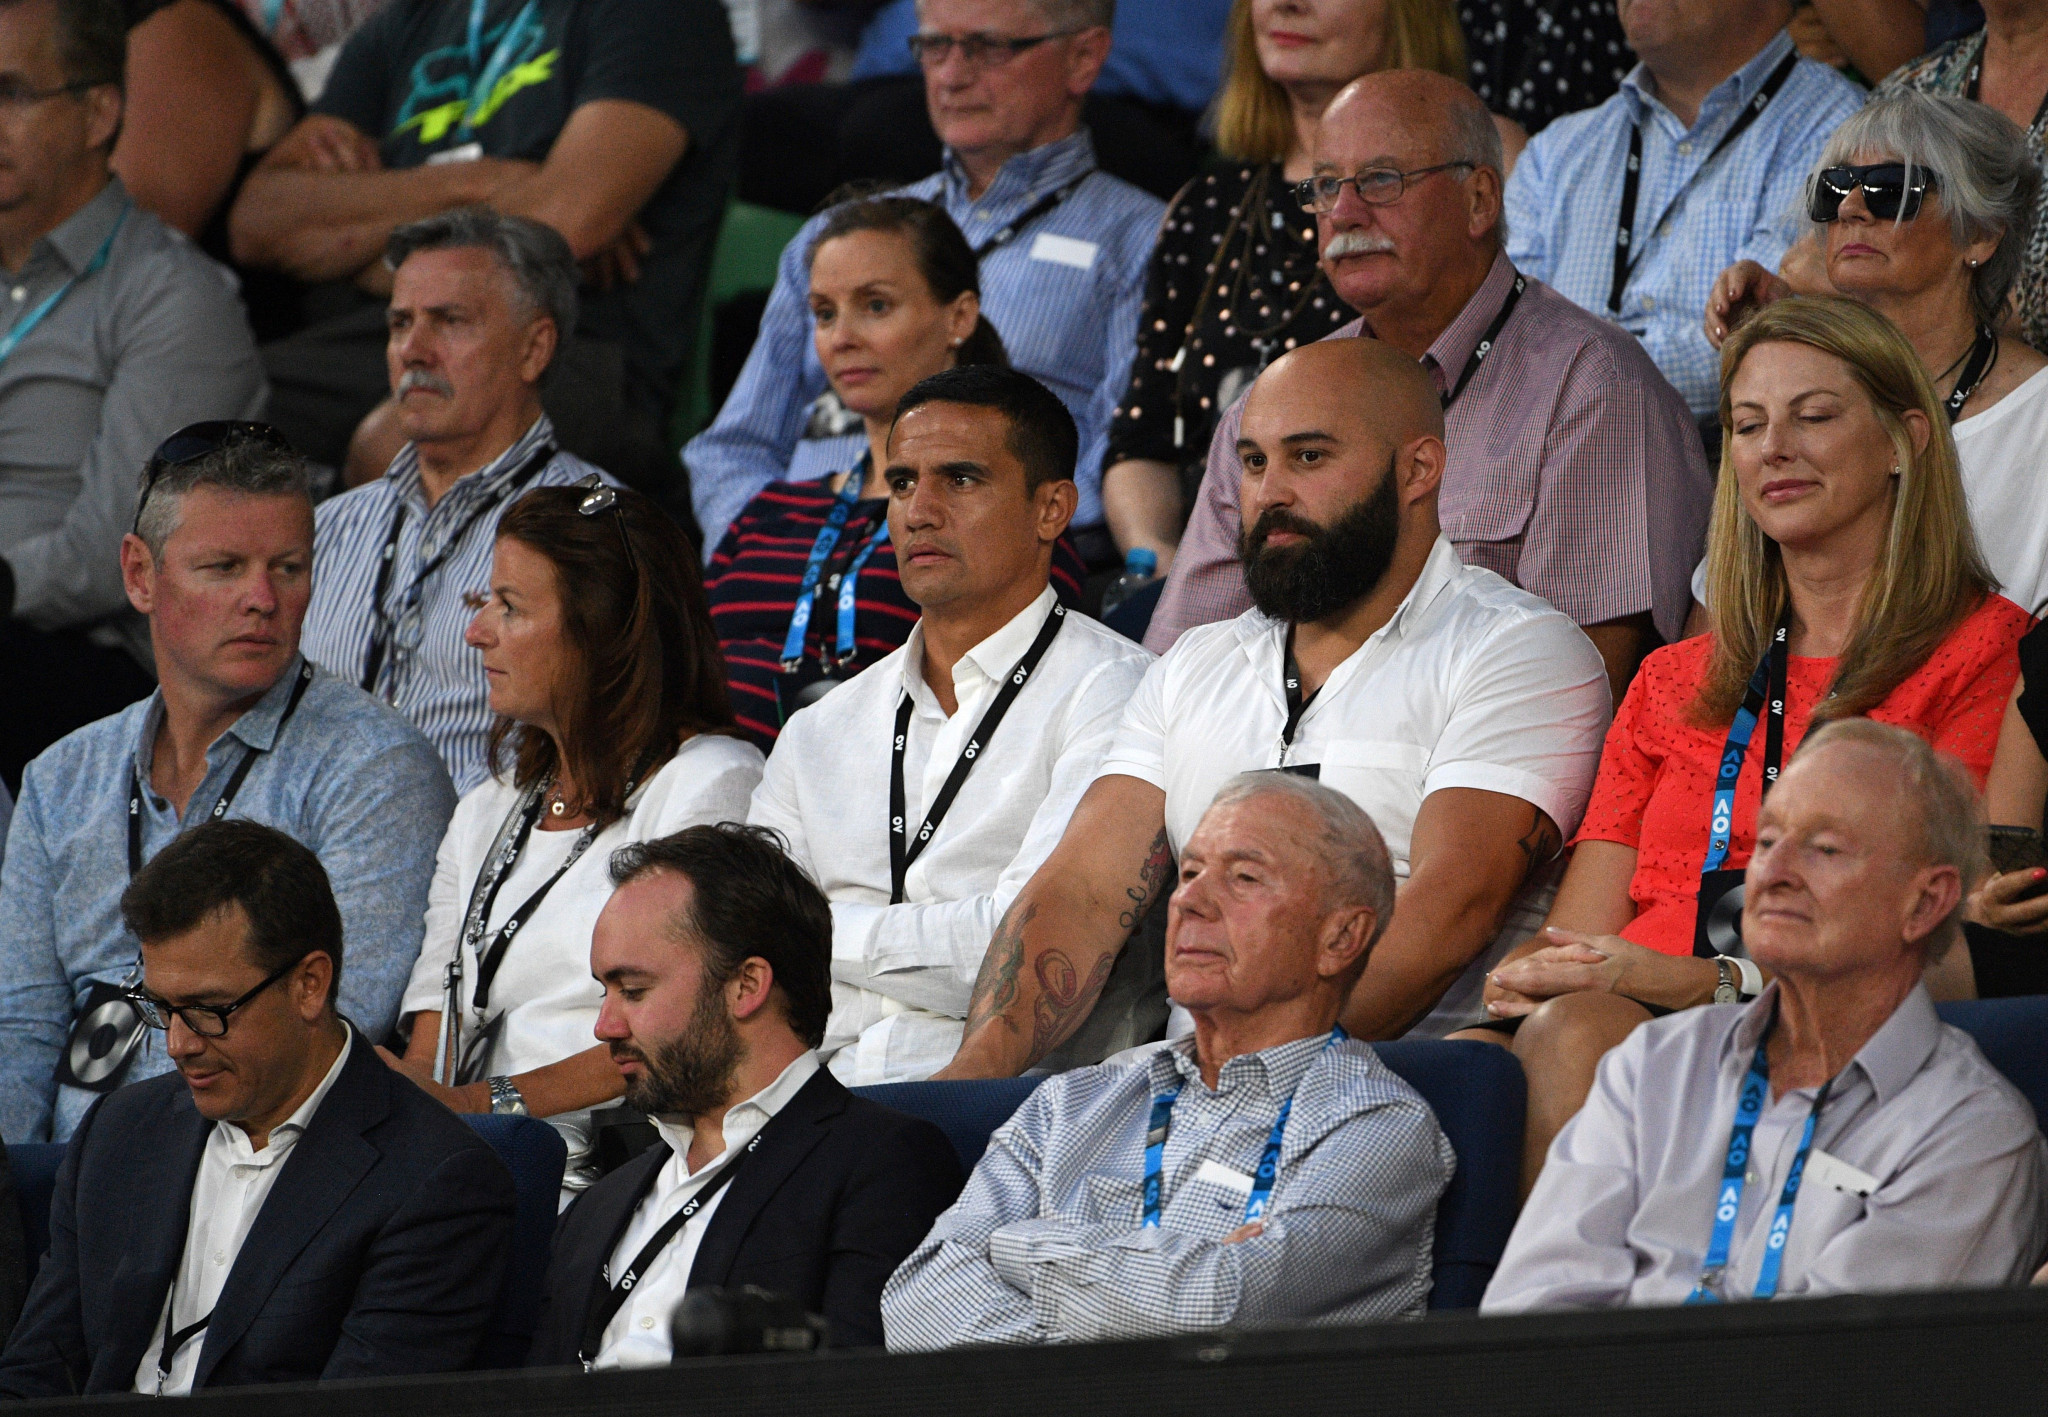 Legendary tennis player Rod Laver, front right, and football player Tim Cahill, second row, centre, were among top Australian sportsmen watching the tennis today ©Getty Images